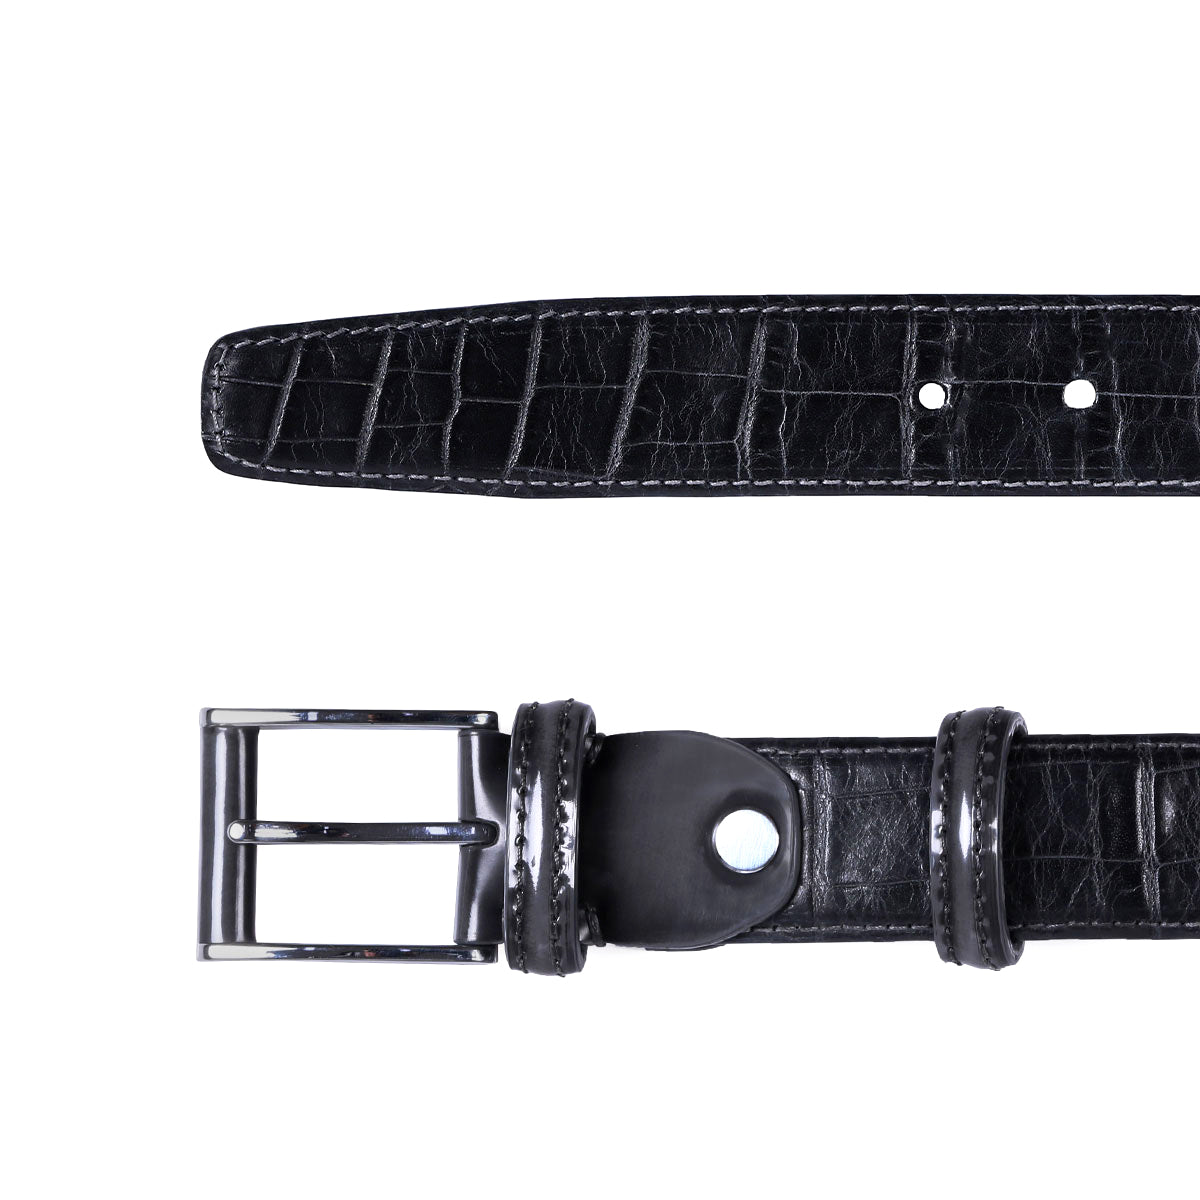 Black leather belt with gray tone